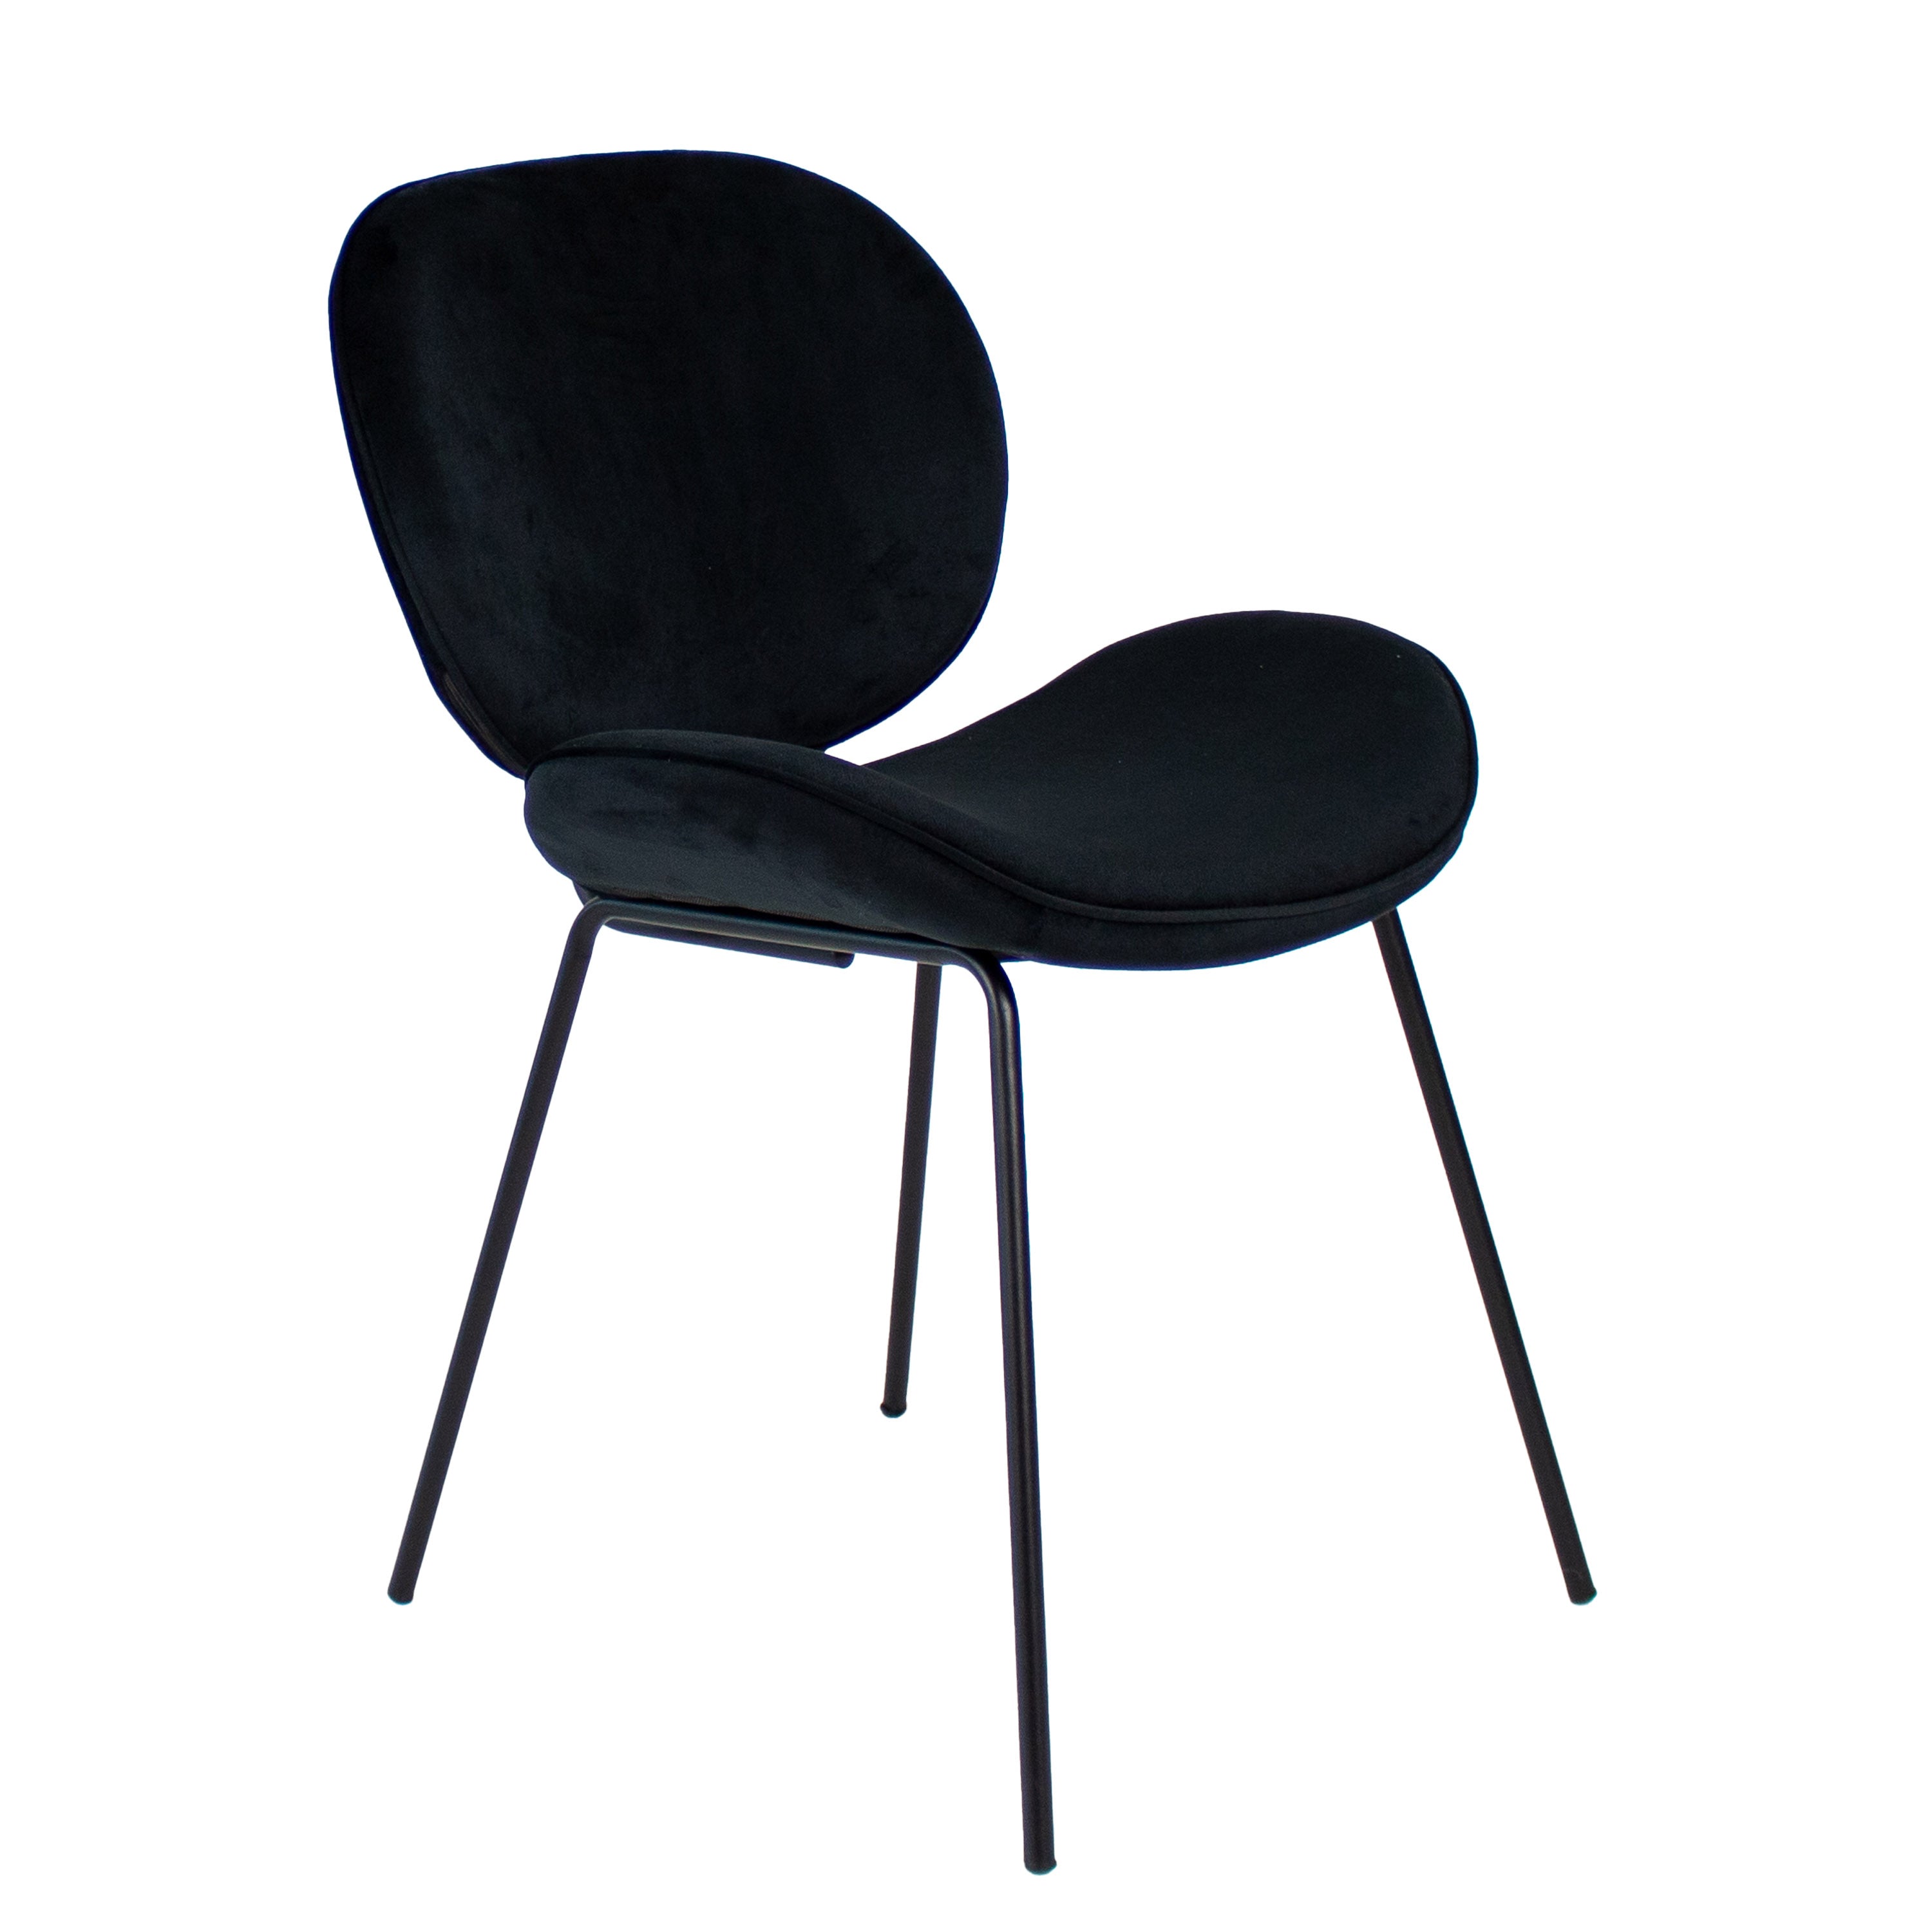 Kick dining room chair Forly